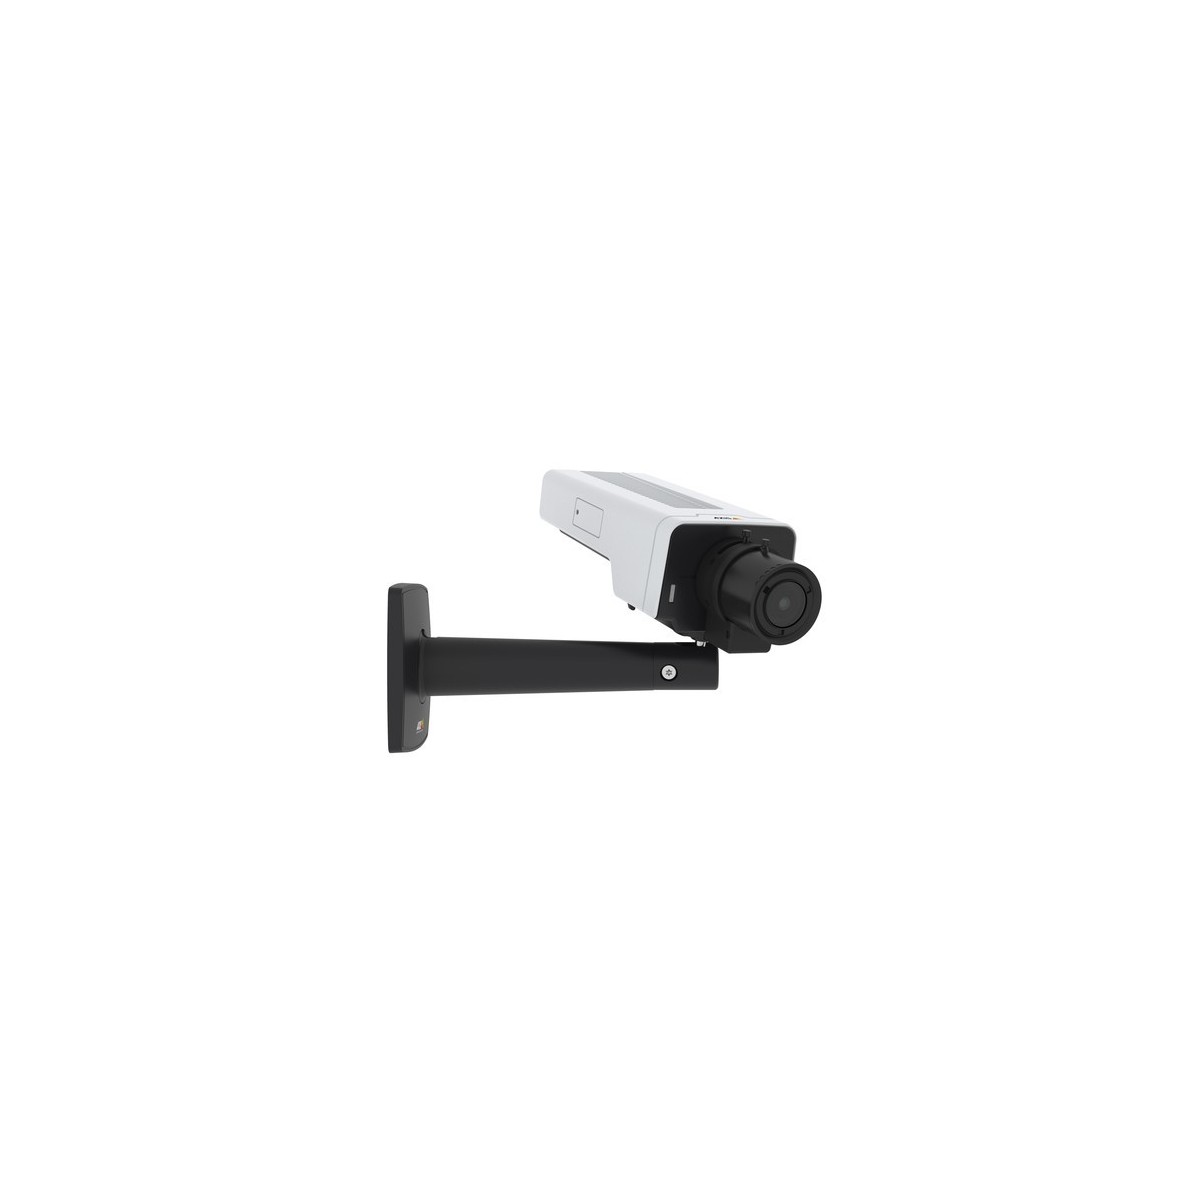 Axis P1377 - IP security camera - Indoor - Wired - Digital PTZ - Pelco-D - Simplified Chinese - Traditional Chinese - German - E